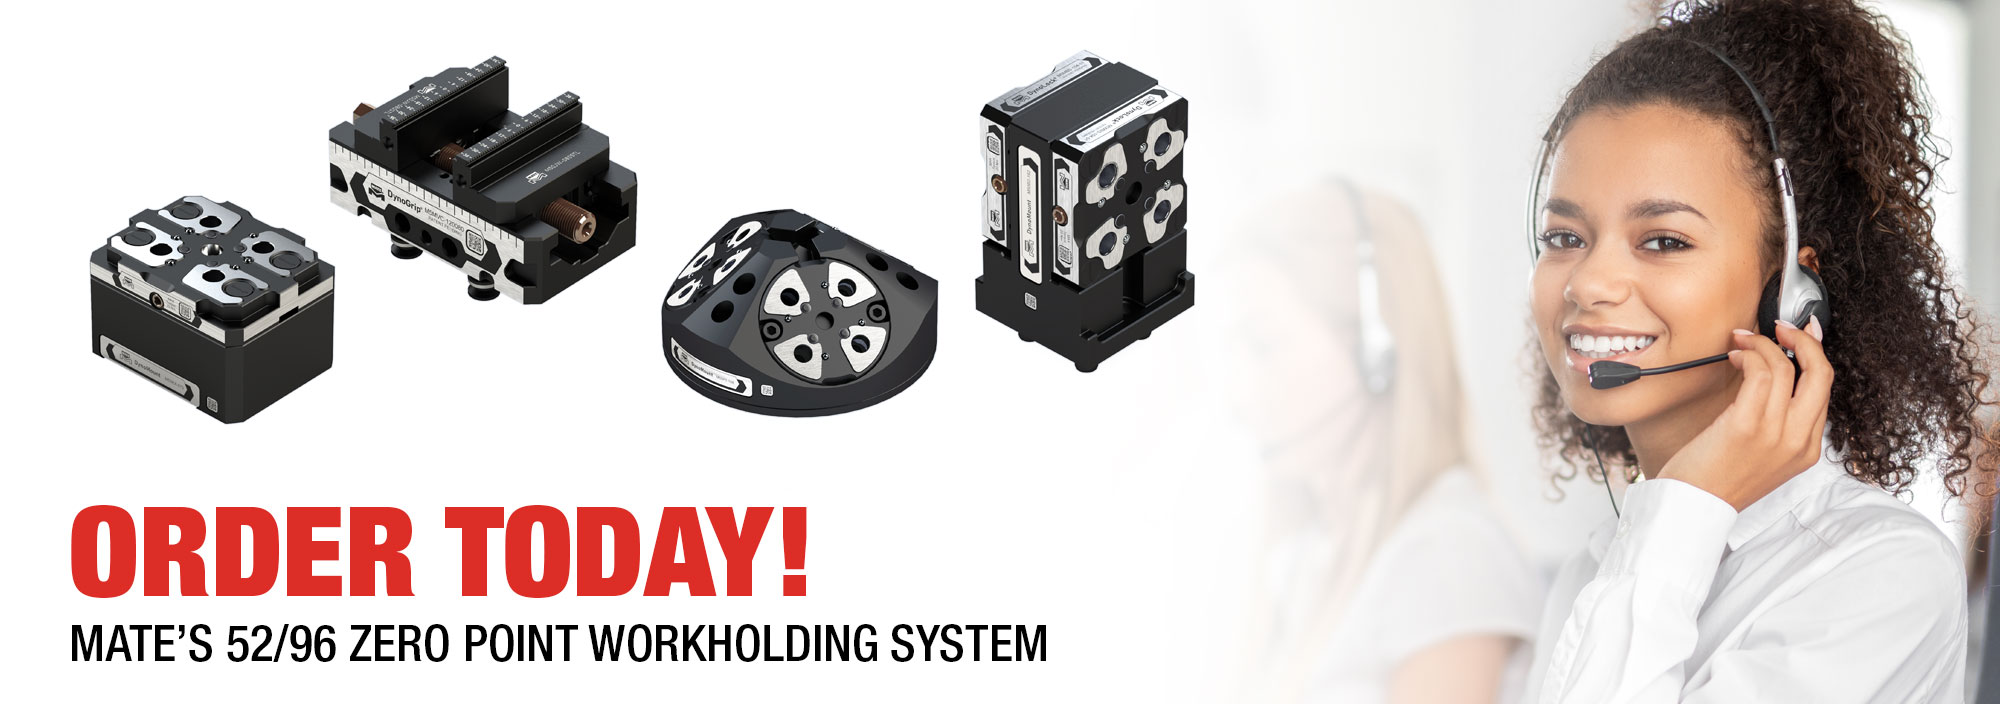 ORDER TODAY! MATE’S 52/96 ZERO POINT WORKHOLDING SYSTEM